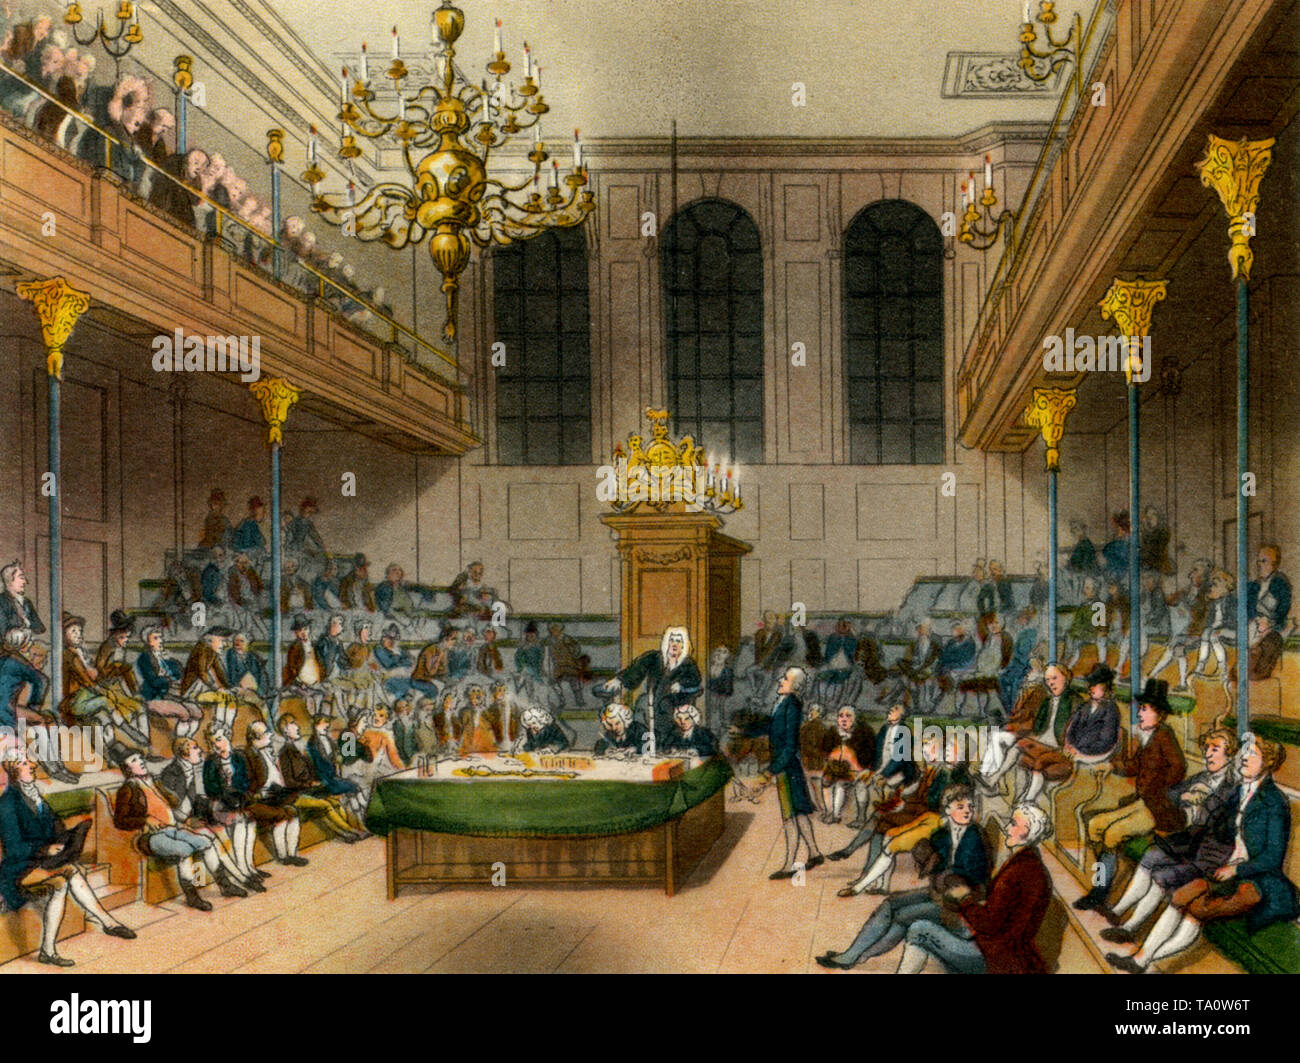 House of Commons, c1808-1810. A print from 'The Microcosm of London', by William Henry Pyne (1770-1843). By Thomas Rowlandson (1756-1827) and Auguste Charles Pugin (1762–1832). The medieval Commons Chamber seen here prior to its destruction by fire in 1834. The new Palace of Westminster was partly designed by Auguste Charles Pugin's son, Augustus Welby Pugin (1812-1852). Stock Photo